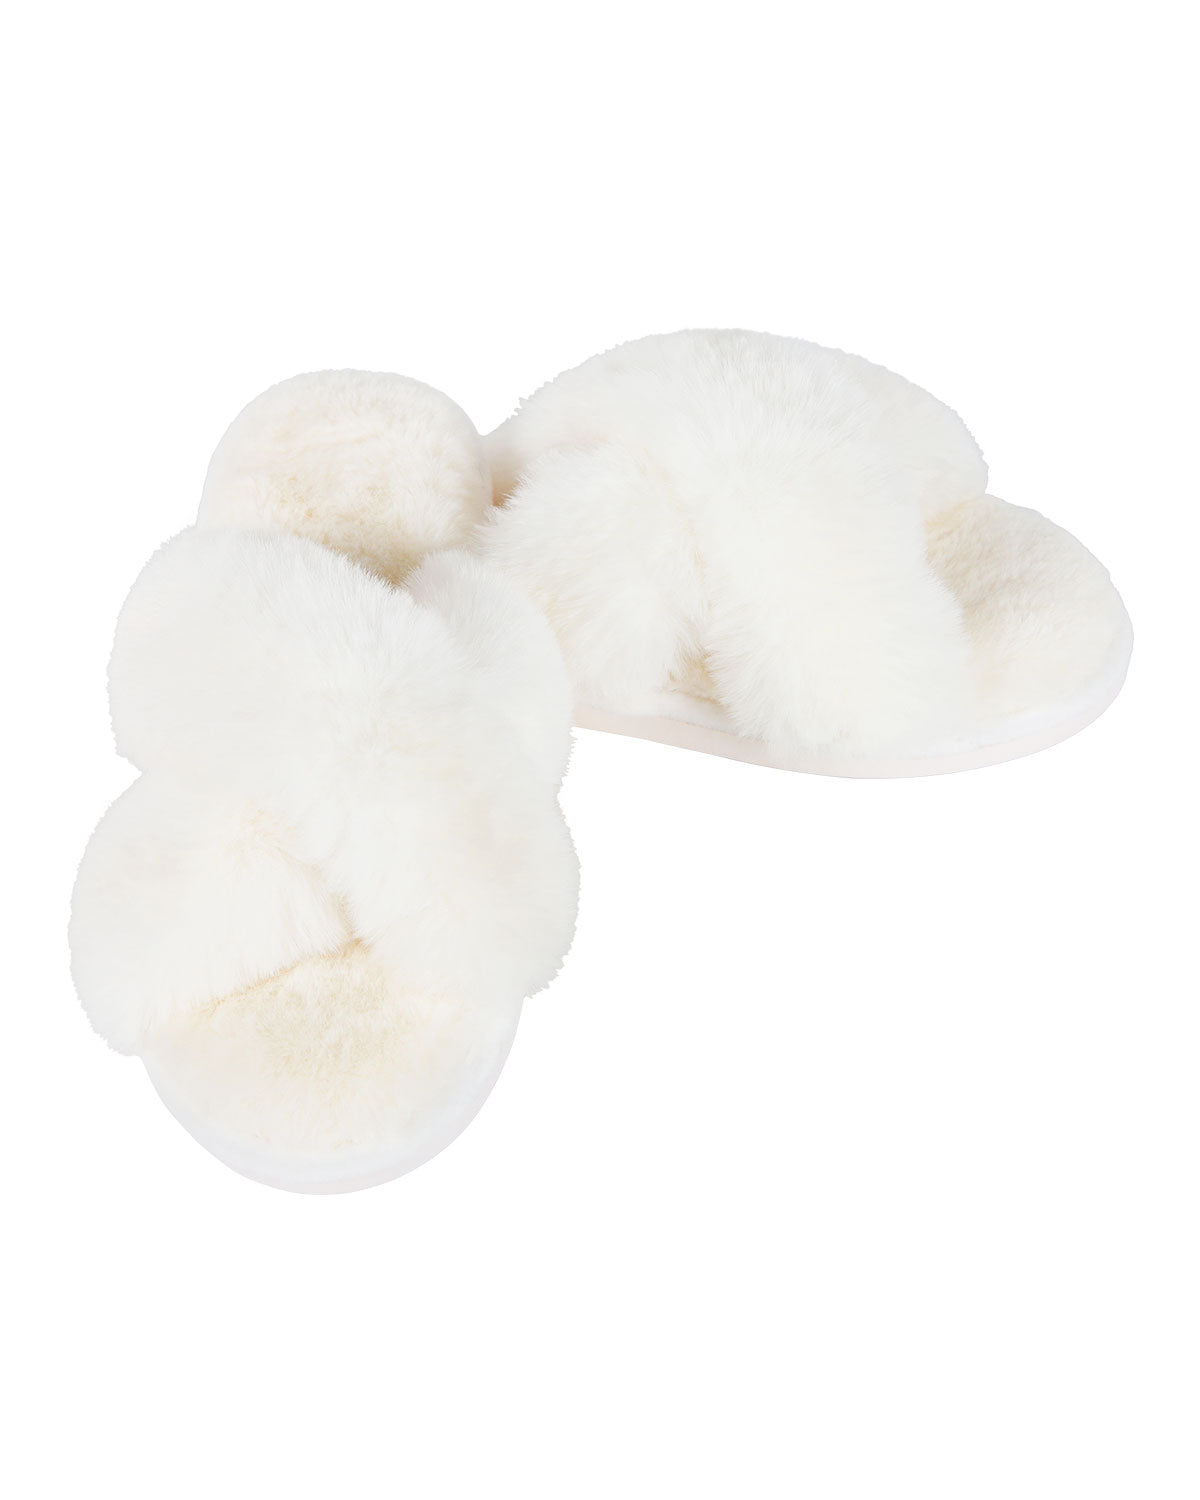 Ivory Beverley Fur Open Toe Plush Slippers - Hair With A Cause   Oncology Boutique     